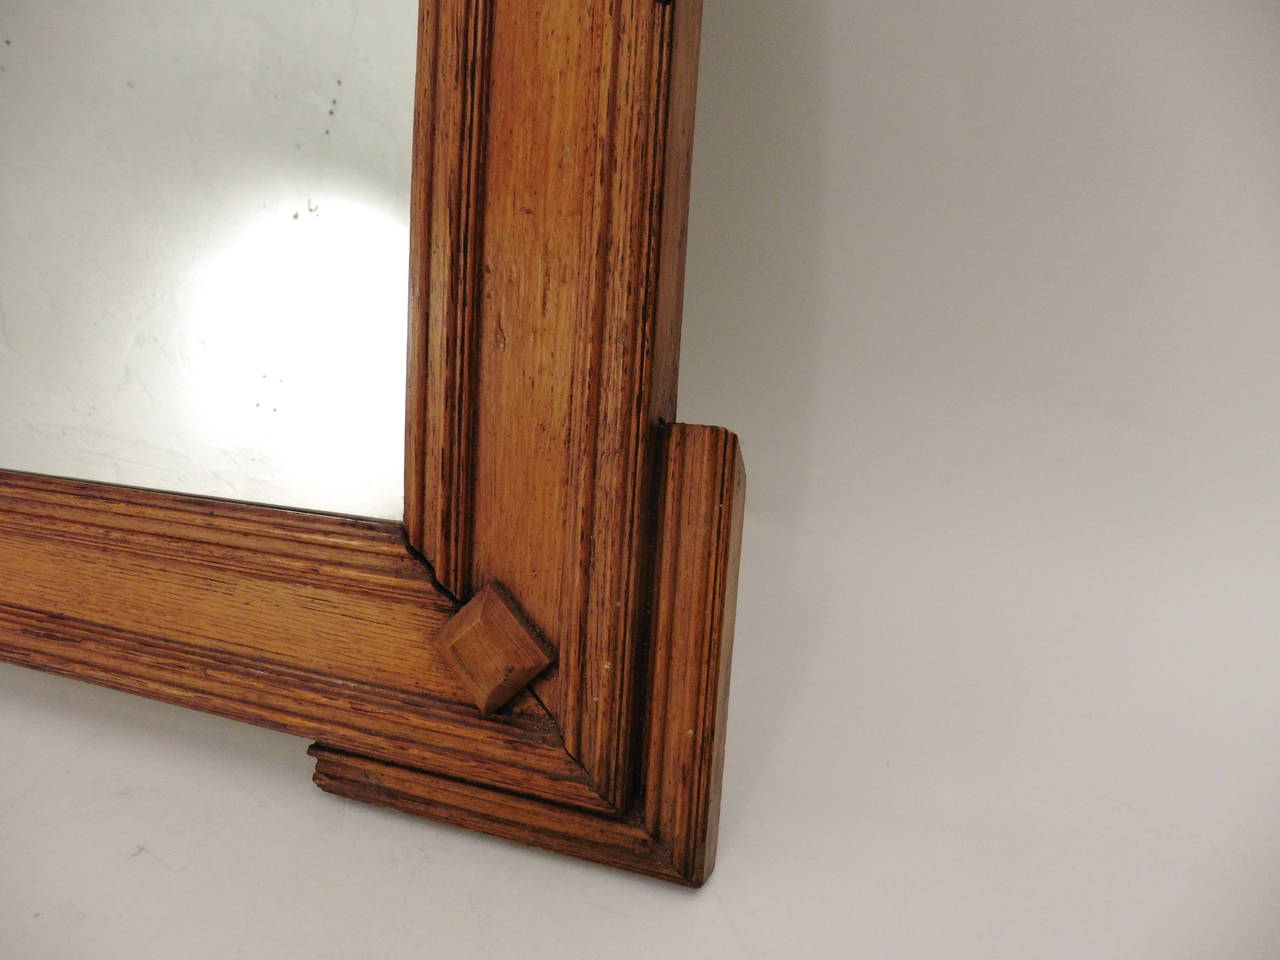 Pair Gothic revival rectangular oak mirrors. Tabernacle style with protruding support in the corners, and clover style finials. English middle of the 19th Century.